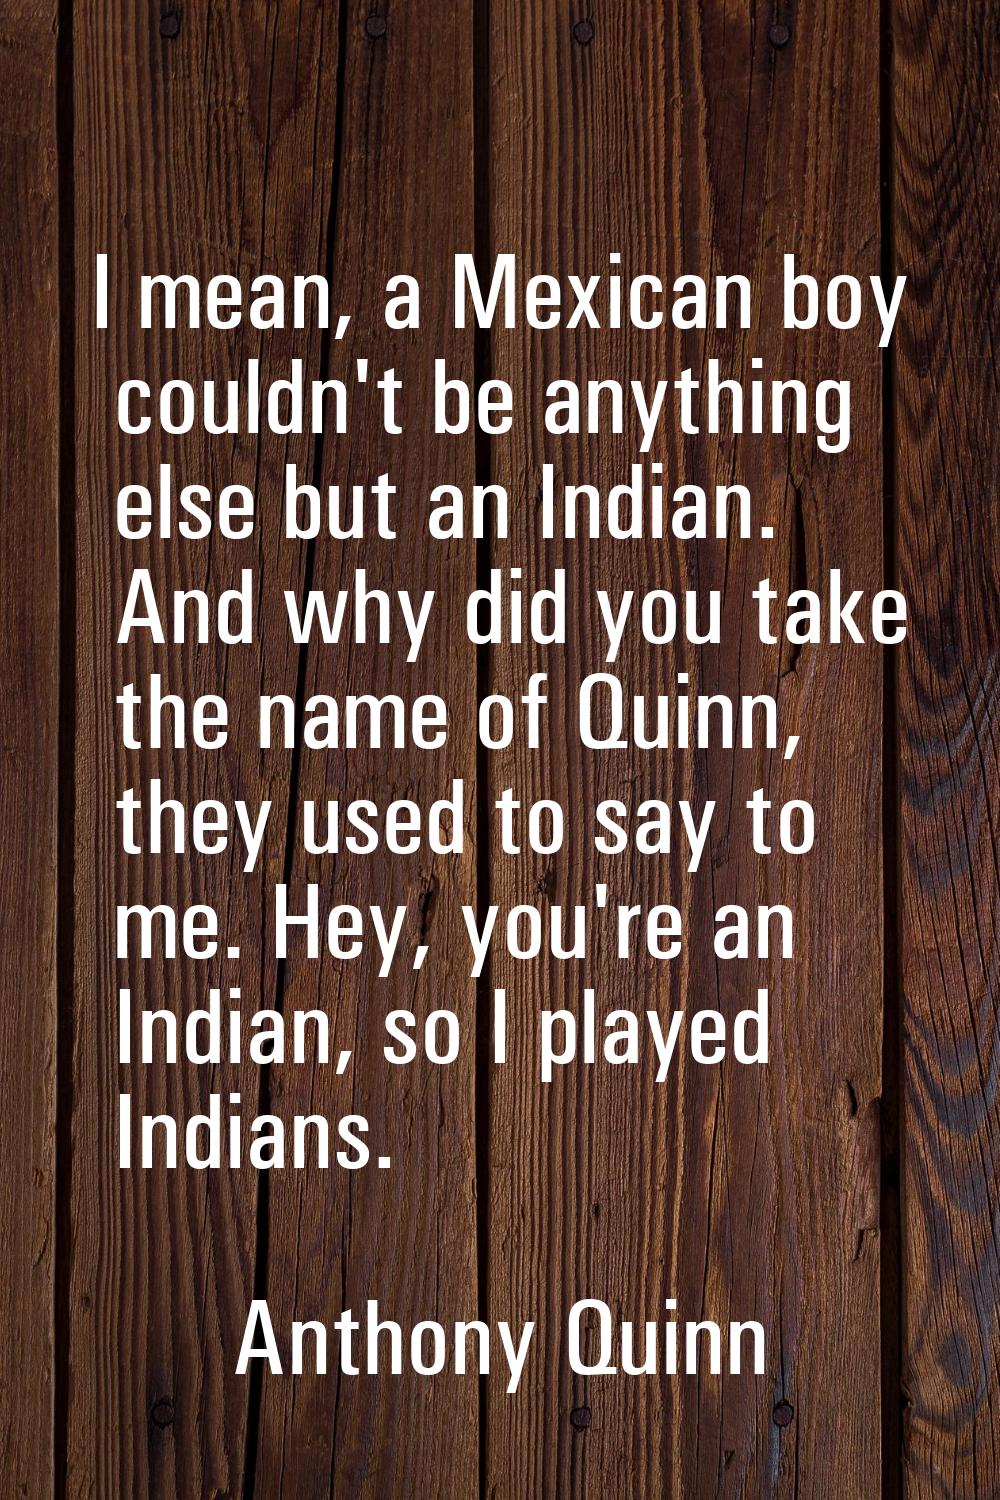 I mean, a Mexican boy couldn't be anything else but an Indian. And why did you take the name of Qui